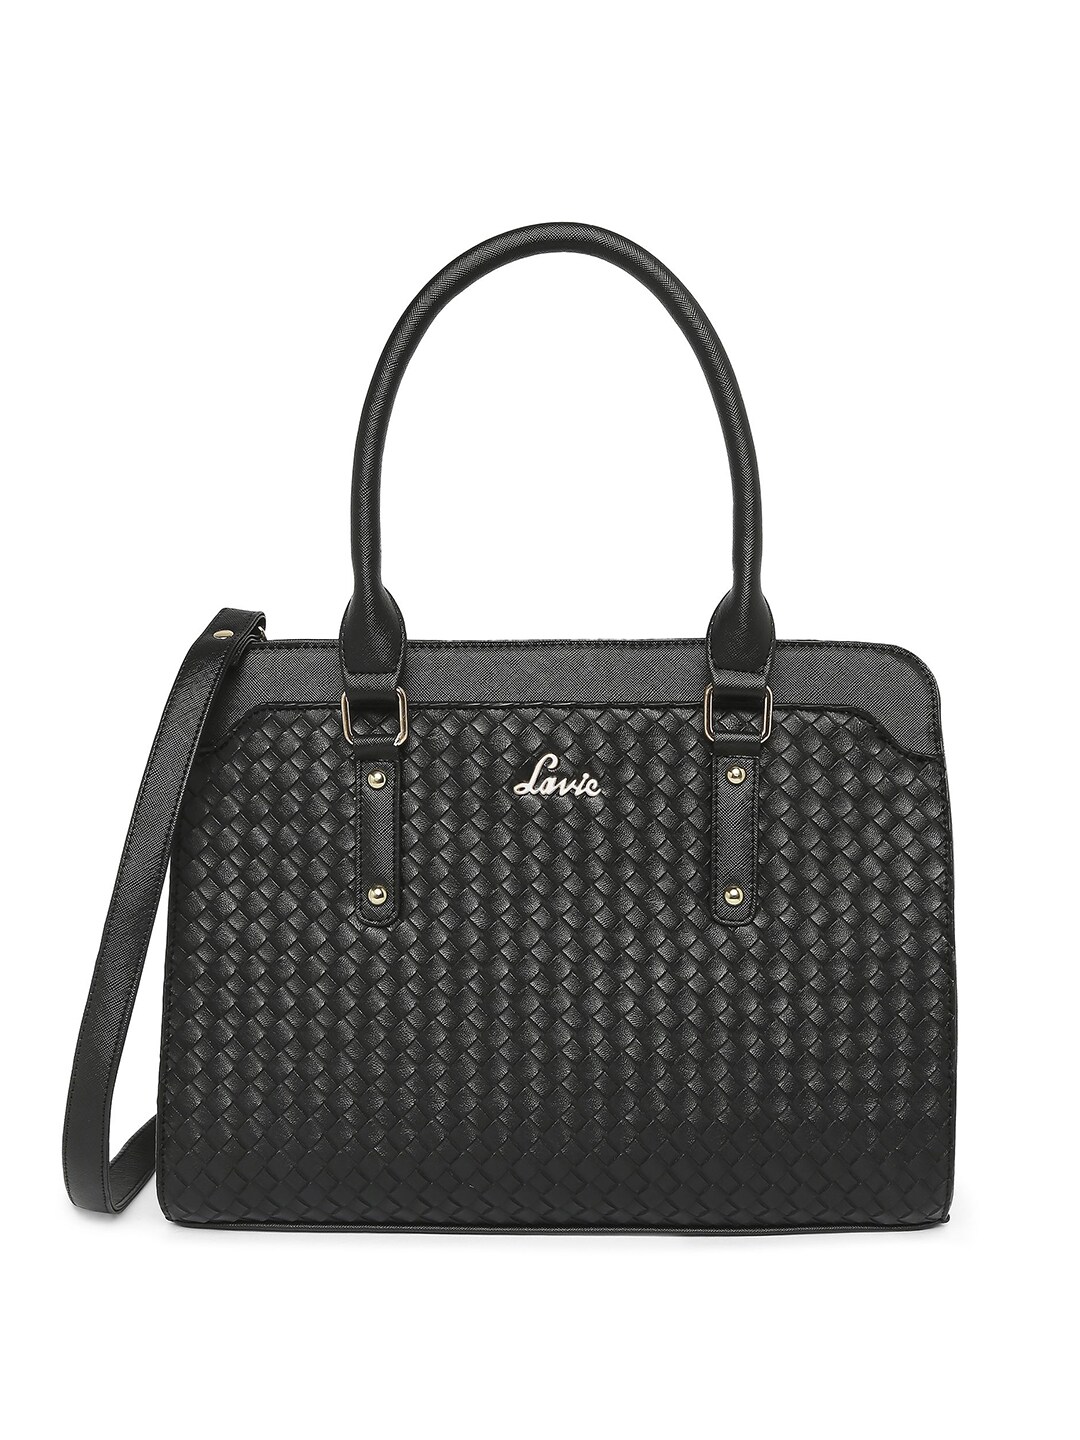 Lavie Black Textured Structured Handheld Bag with Quilted Price in India